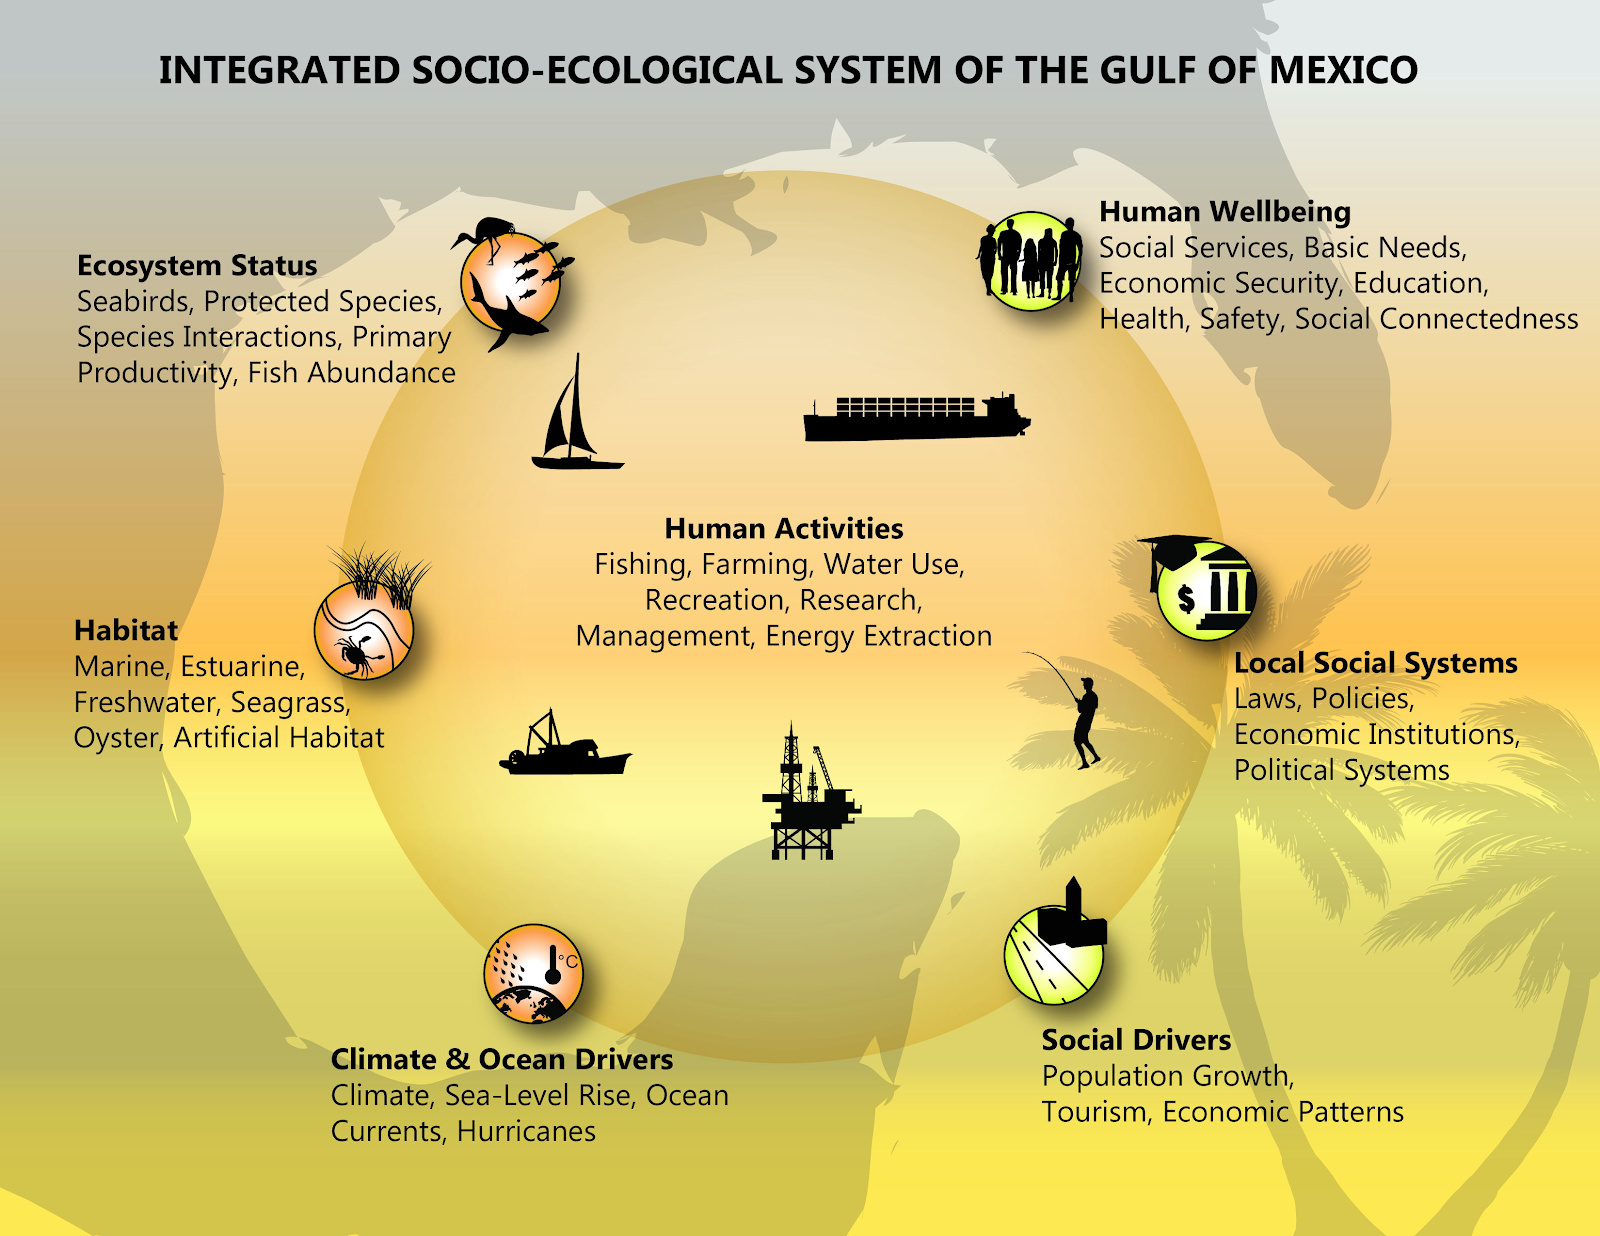 Gulf of Mexico Integrated Socio-Ecological System